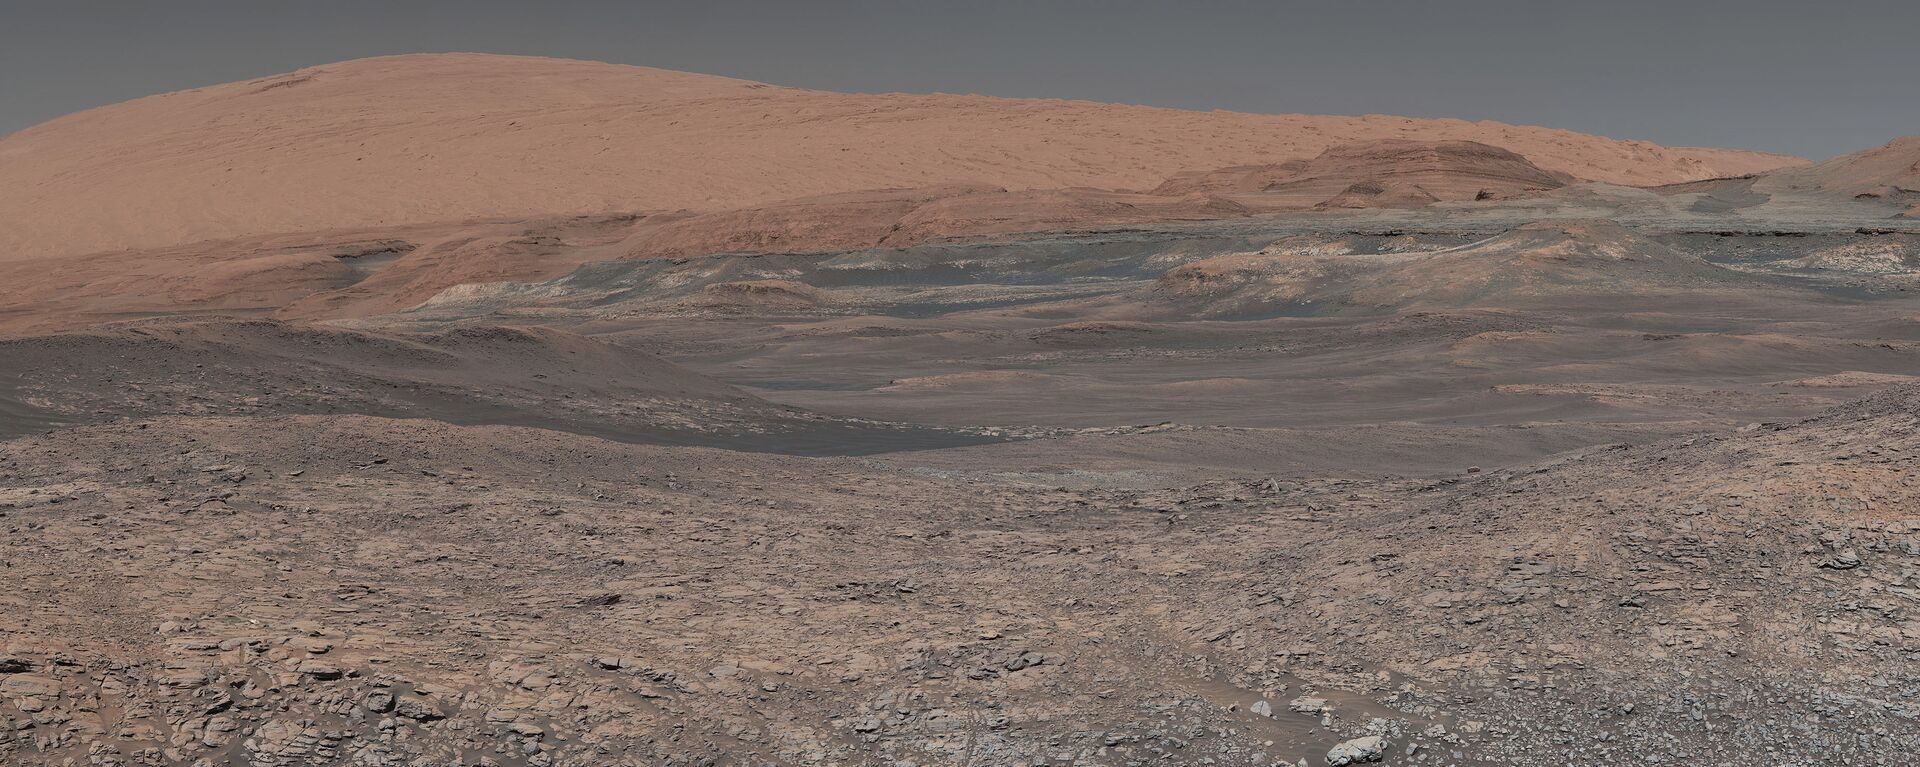 This image provided by NASA, assembled from a series of January 2018 photos made by the Mars Curiosity rover, shows an uphill view of Mount Sharp, which Curiosity has been climbing. - Sputnik International, 1920, 24.03.2021